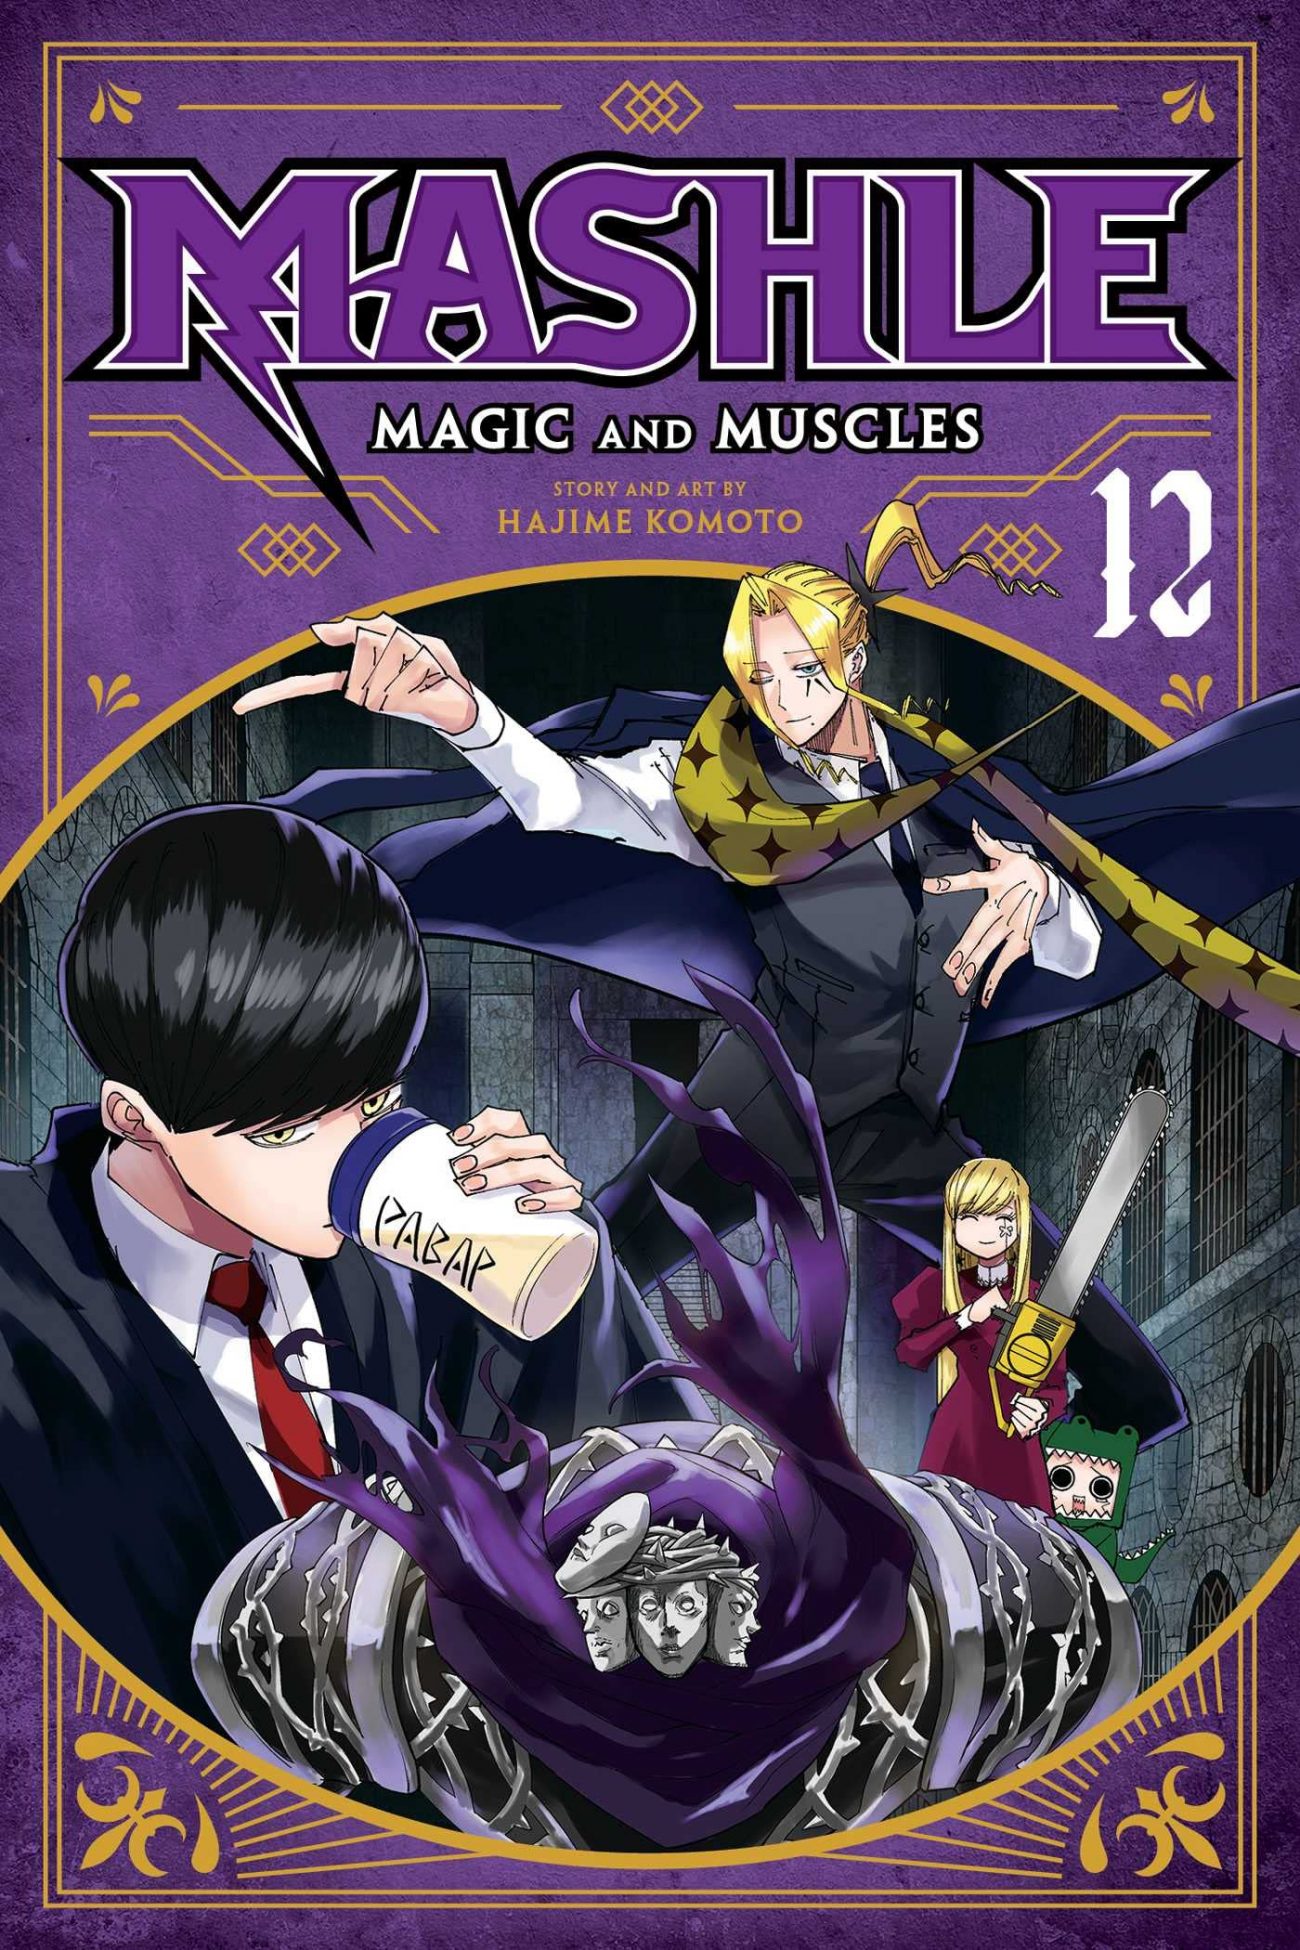 Mashle: Magic and Muscles episode 9 - Release date and time, what to  expect, and more